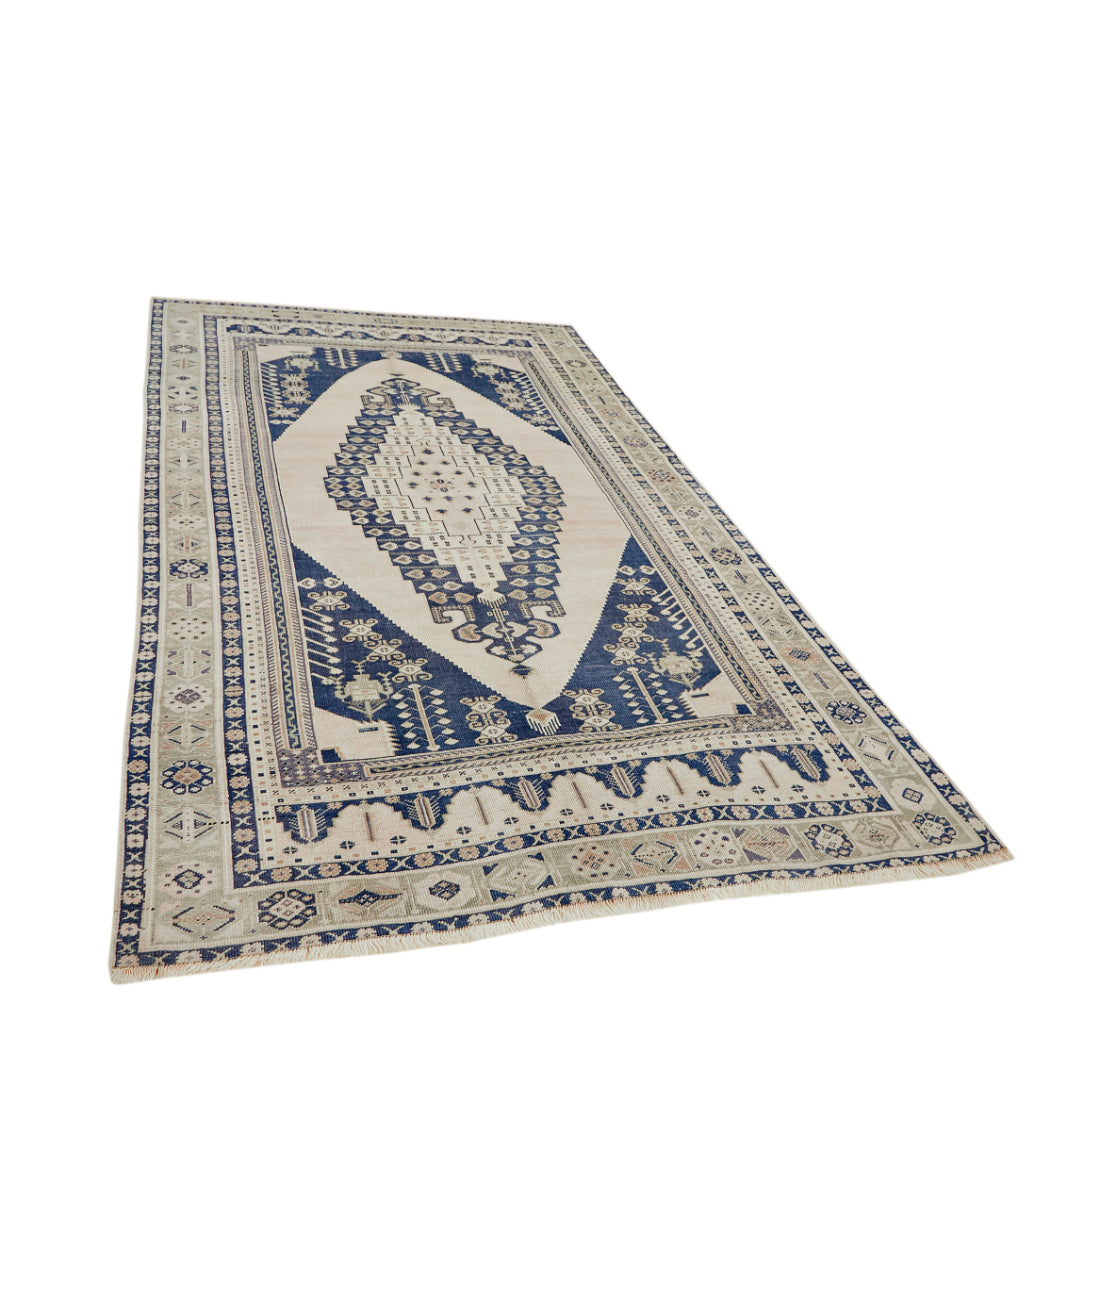 Hand Knotted Turkey Taspinar Wool Rug 5'5" x 9'6" 5' 5" X 9' 6" (165 X 290) / Ivory / Blue